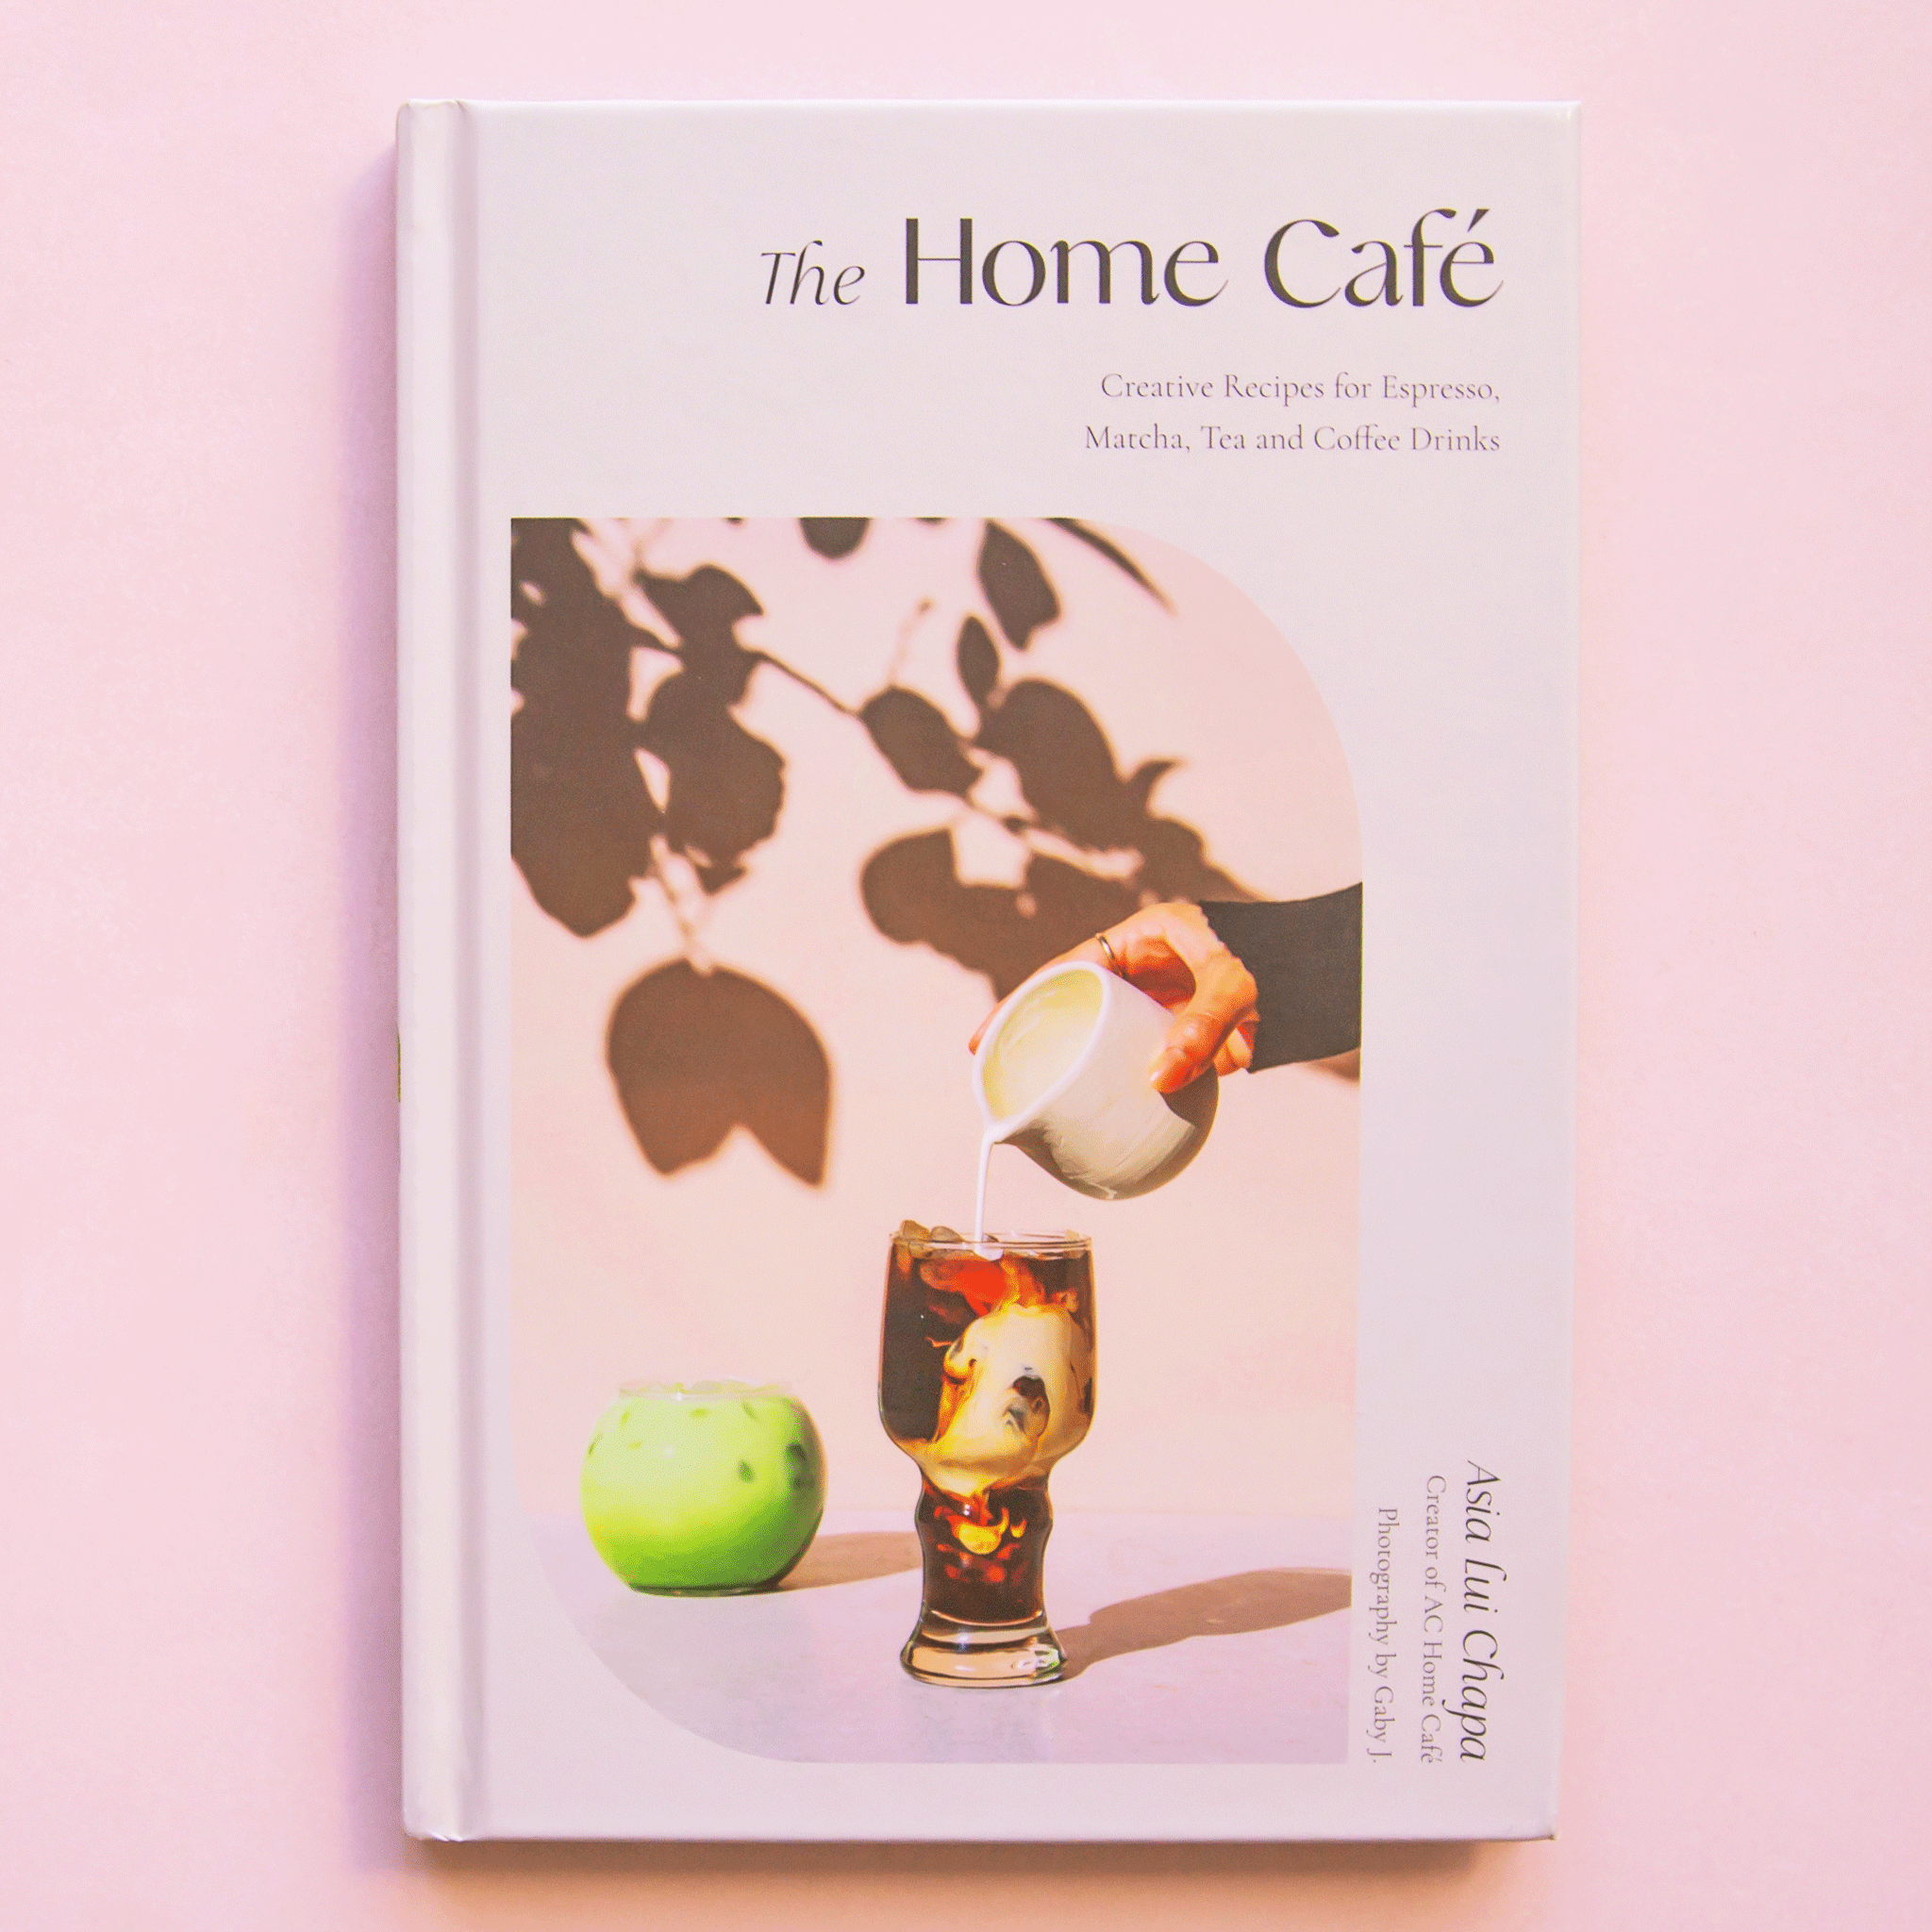 On a light pink background is an ivory book with a photograph of a coffee in a glass and cream being poured in along with the title of the book at the top that reads, "The Home Café Creative Recipes for Espresso, Matcha, Tea and Coffee Drinks".